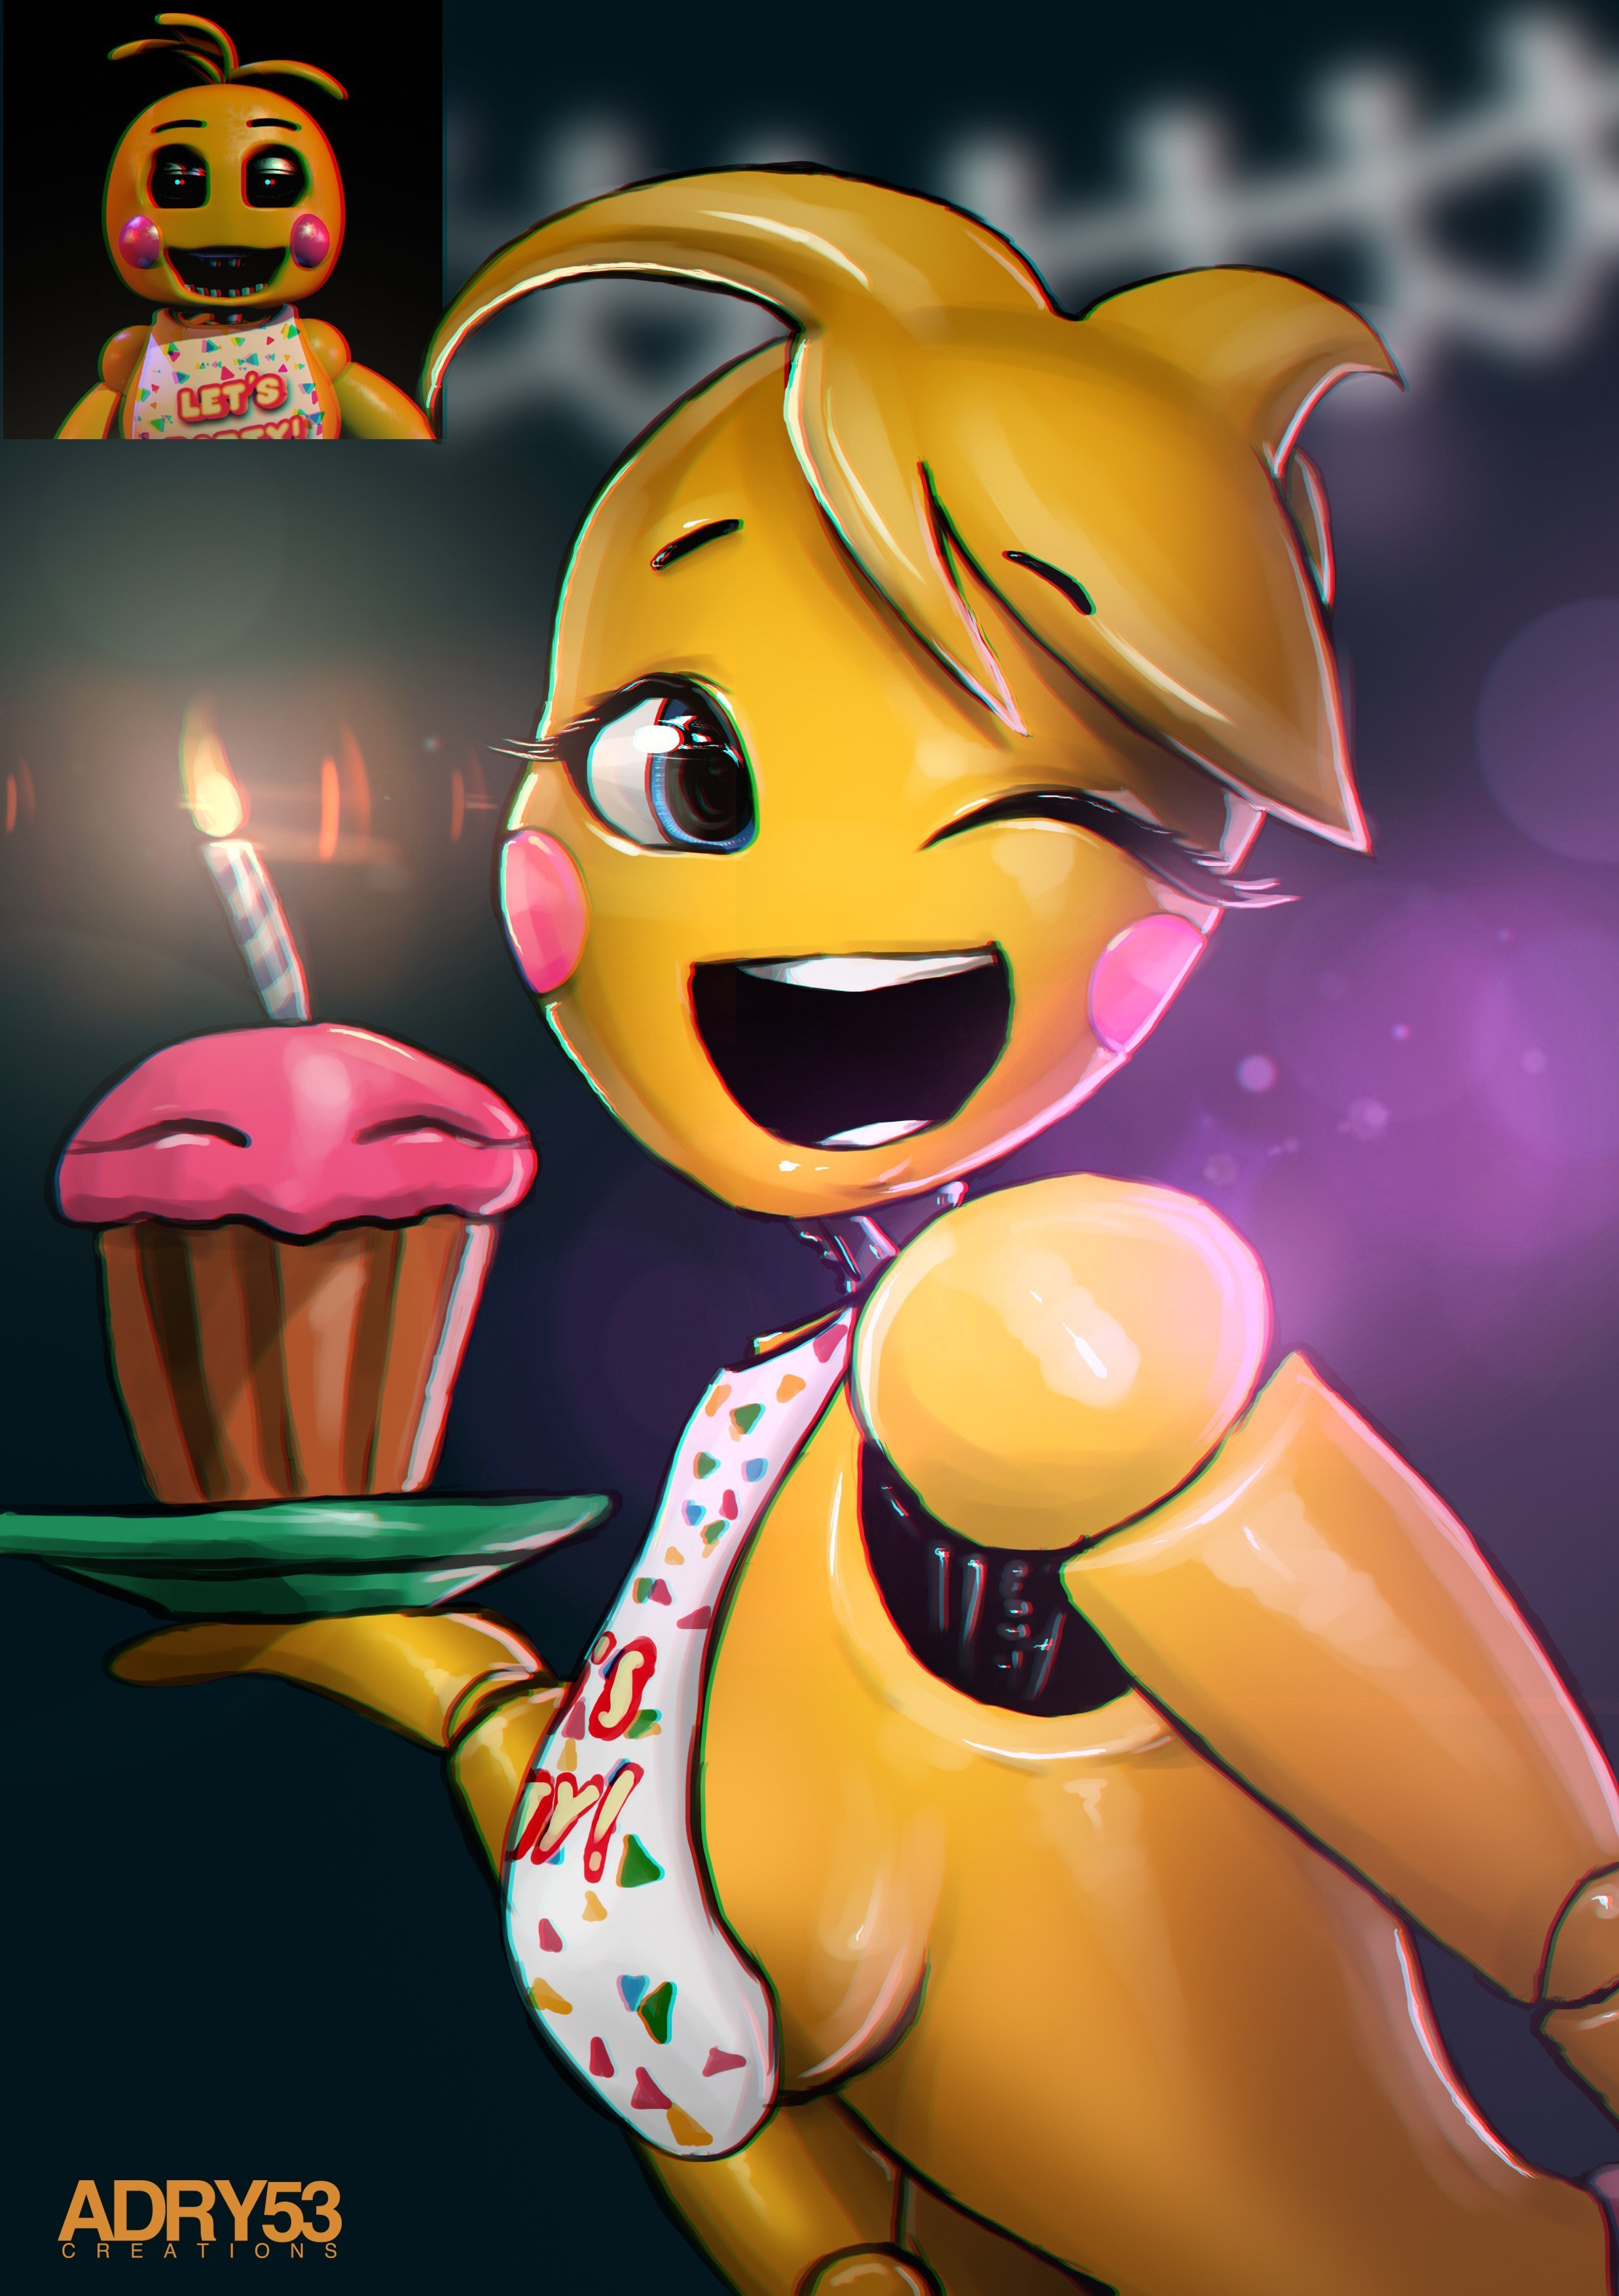 bhe love recommends five nights at freddys chica naked pic